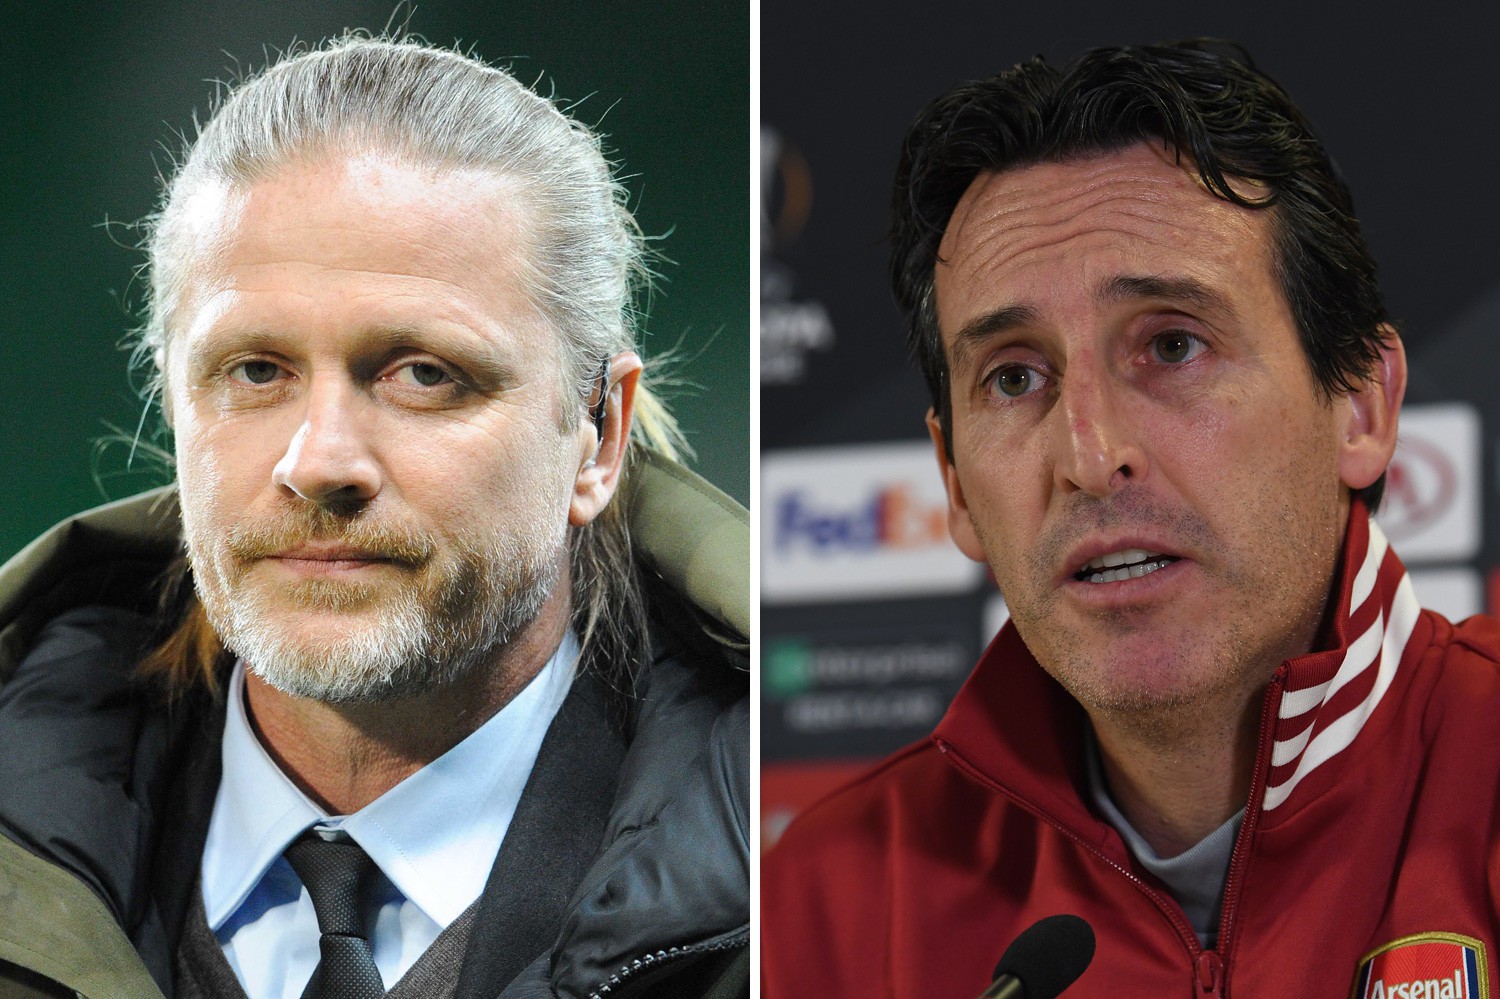 , Arsenal legend Emmanuel Petit slams Unai Emery saying nothing has changed since Wenger left and team p***es me off